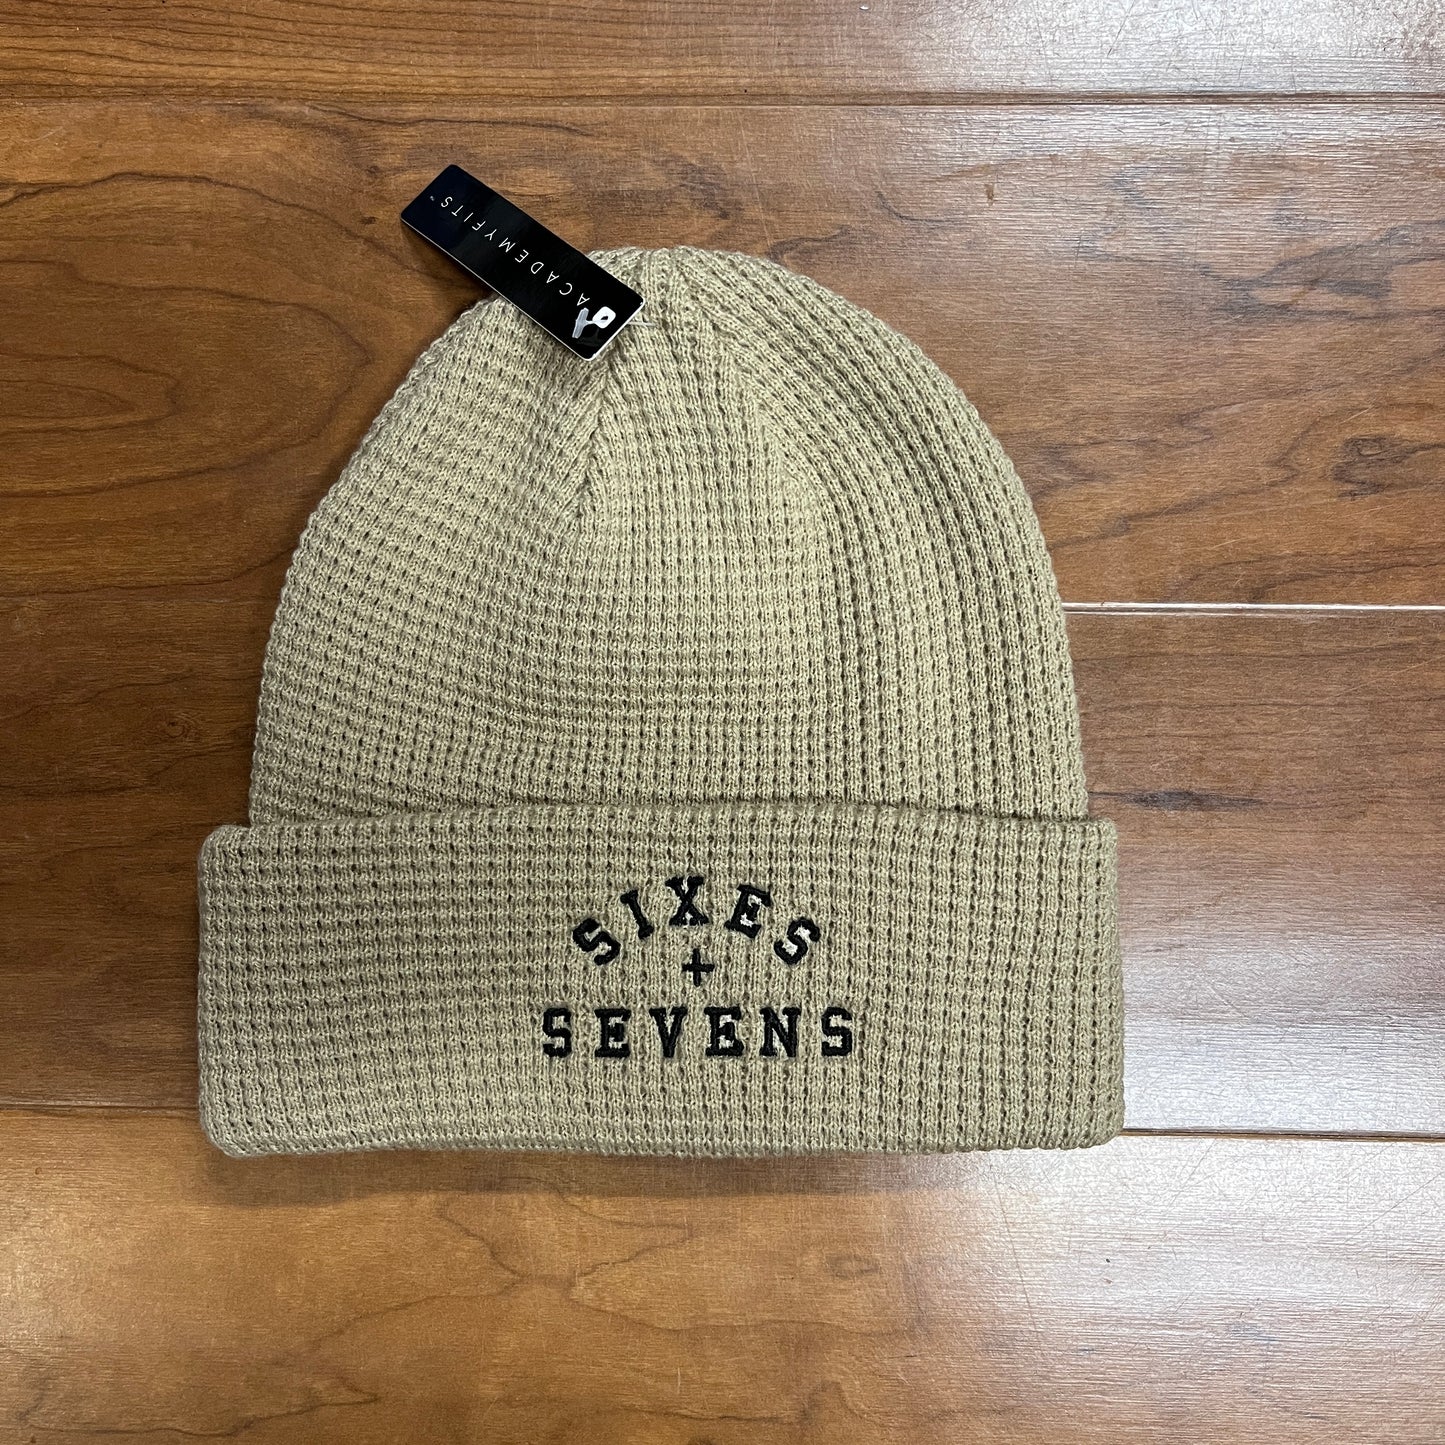 Sixes and Sevens Waffle Knit Beanie